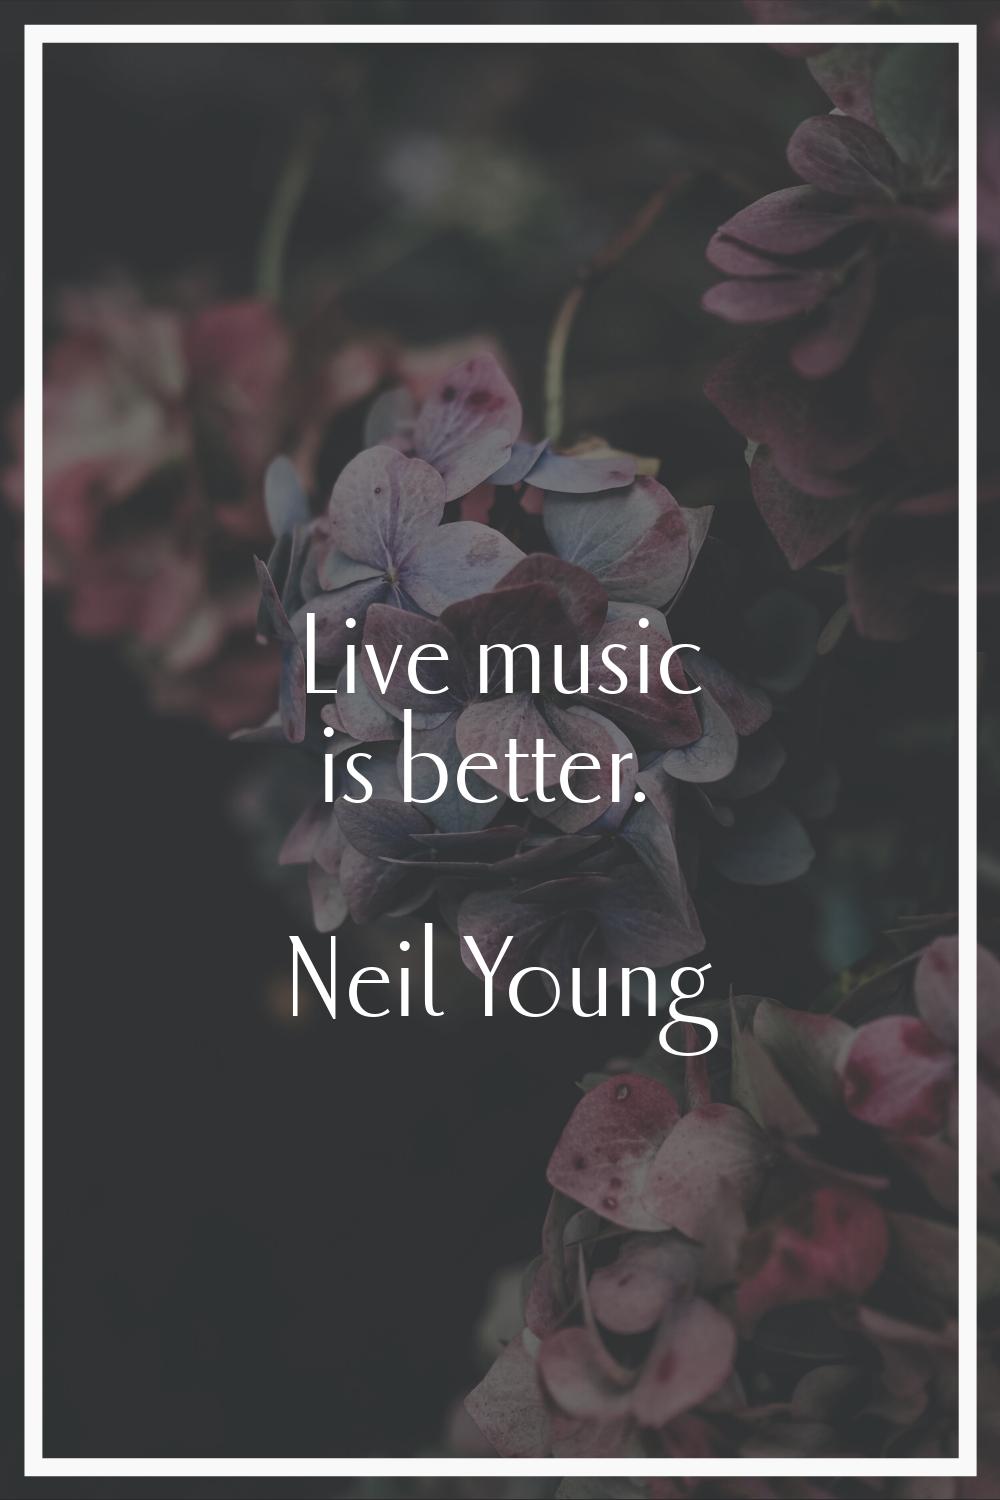 Live music is better.